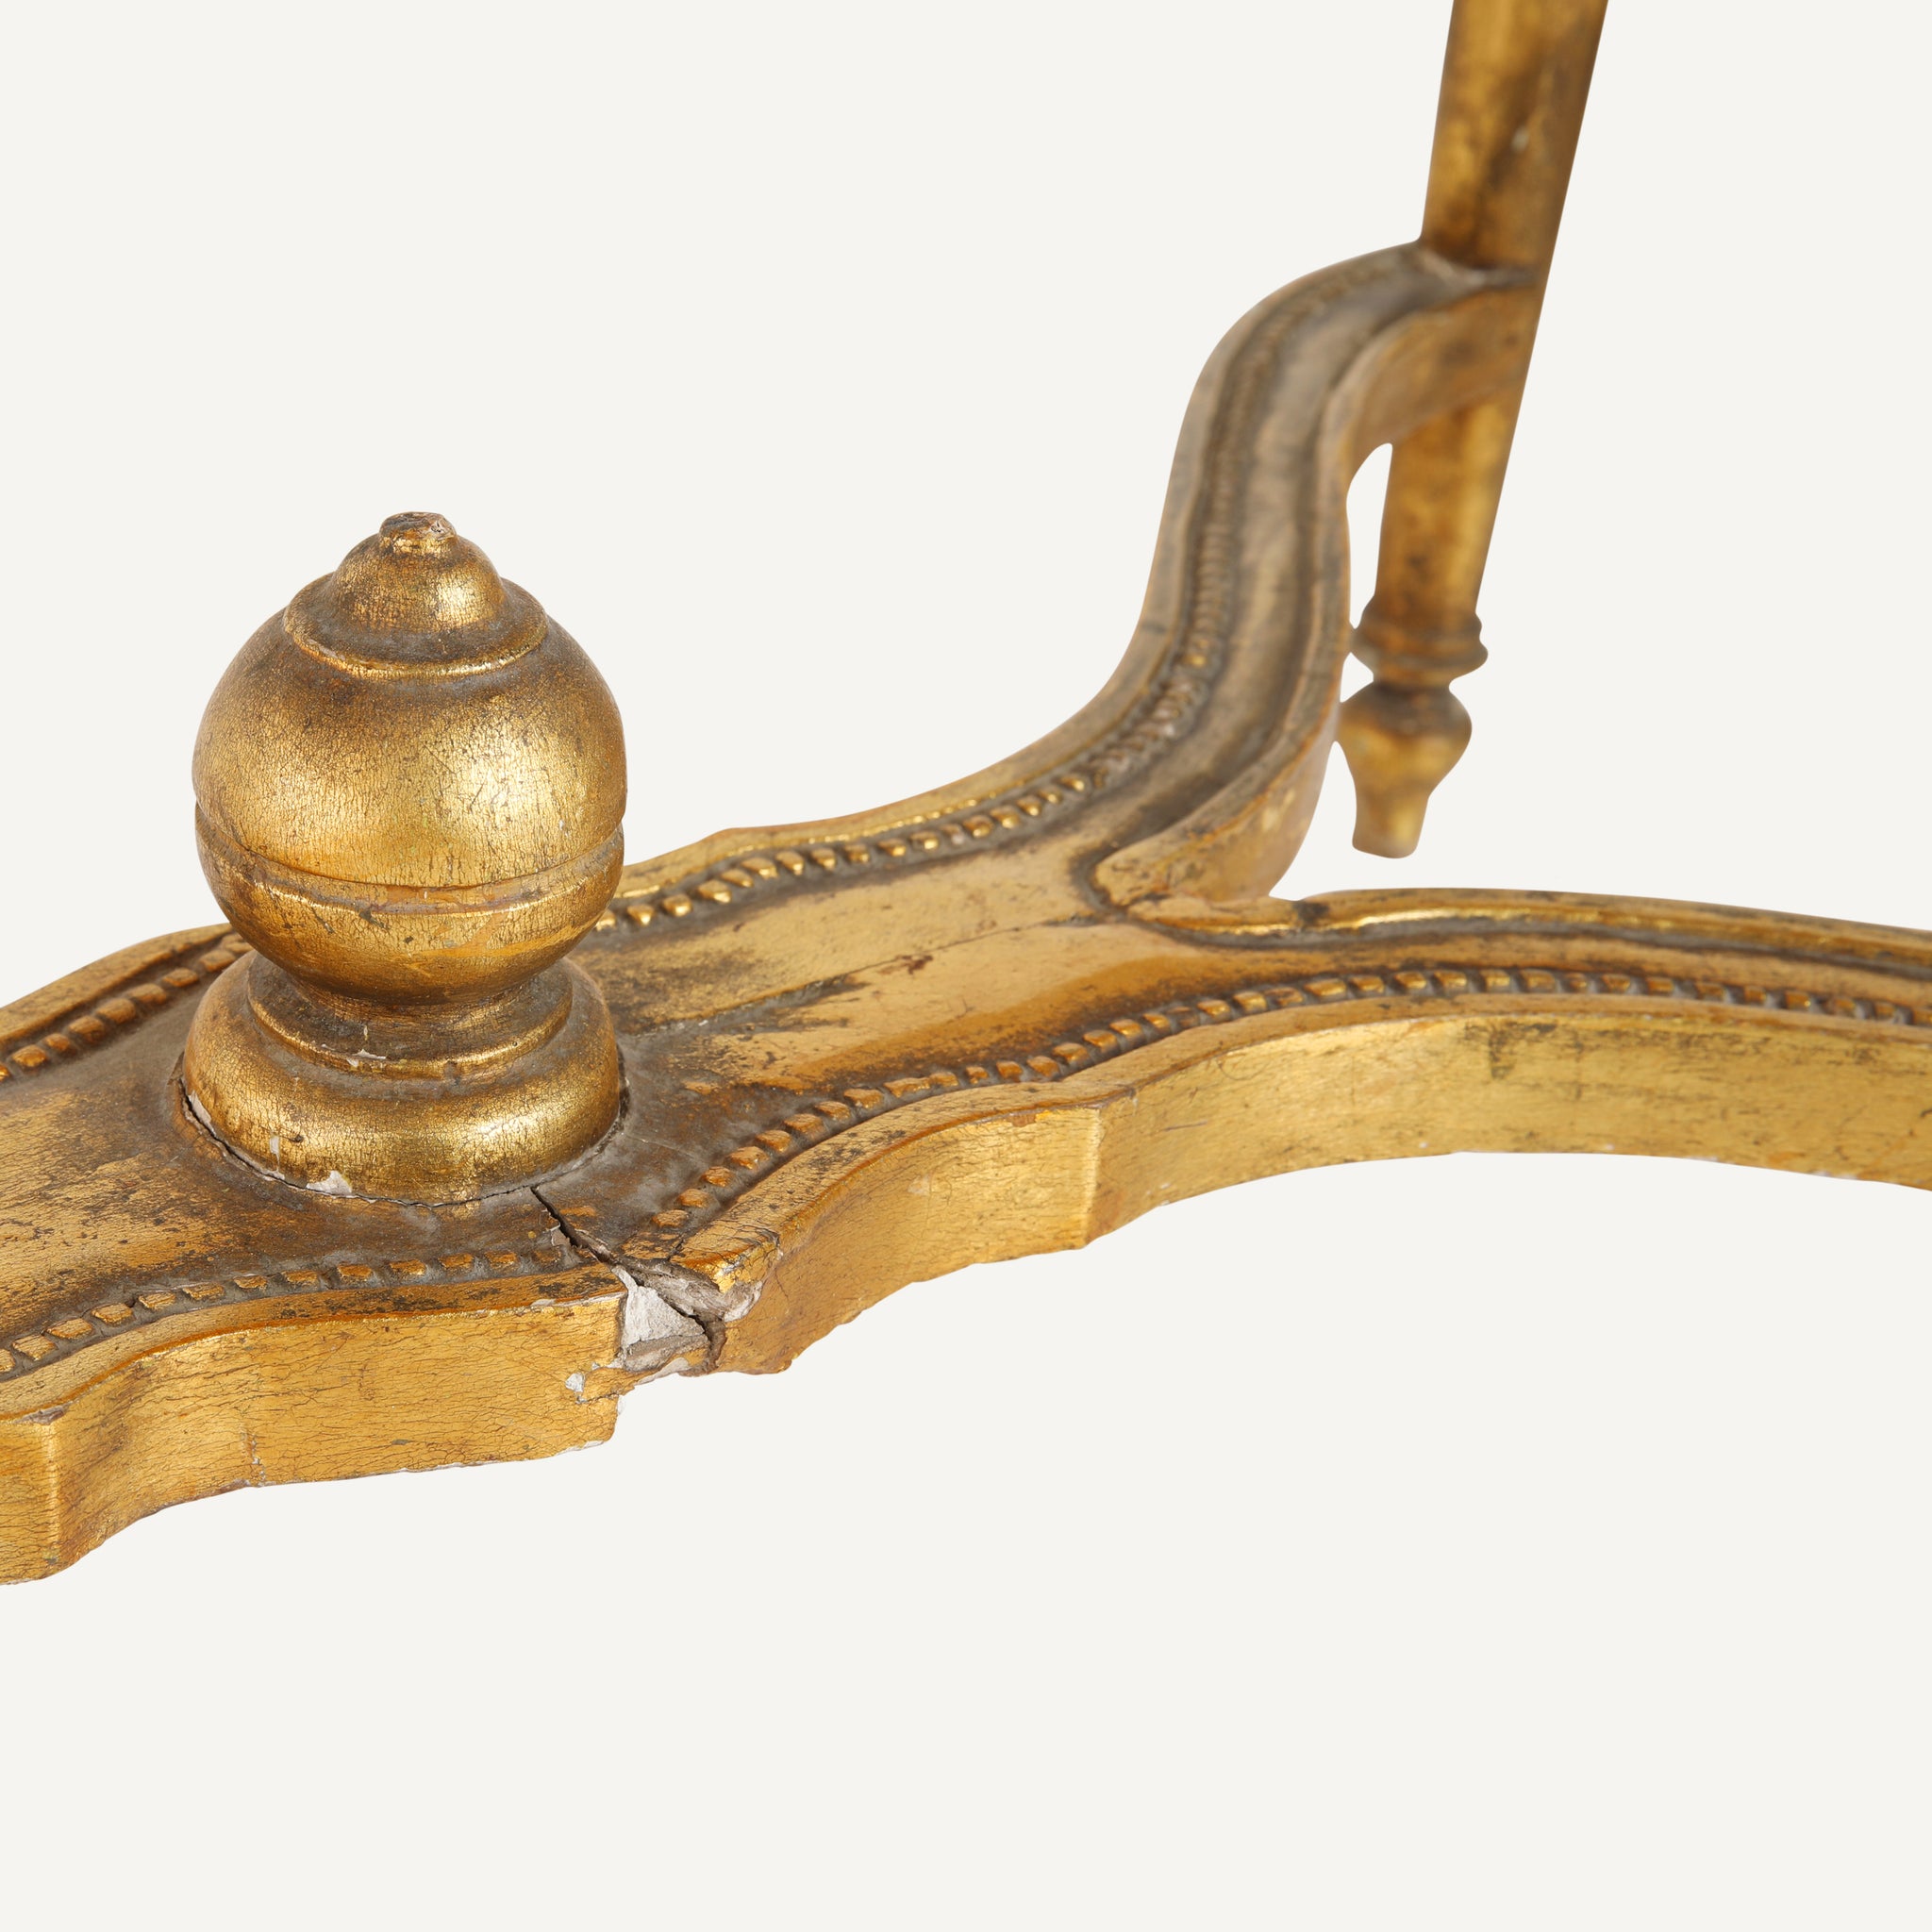 ANTIQUE GILDED BENCH